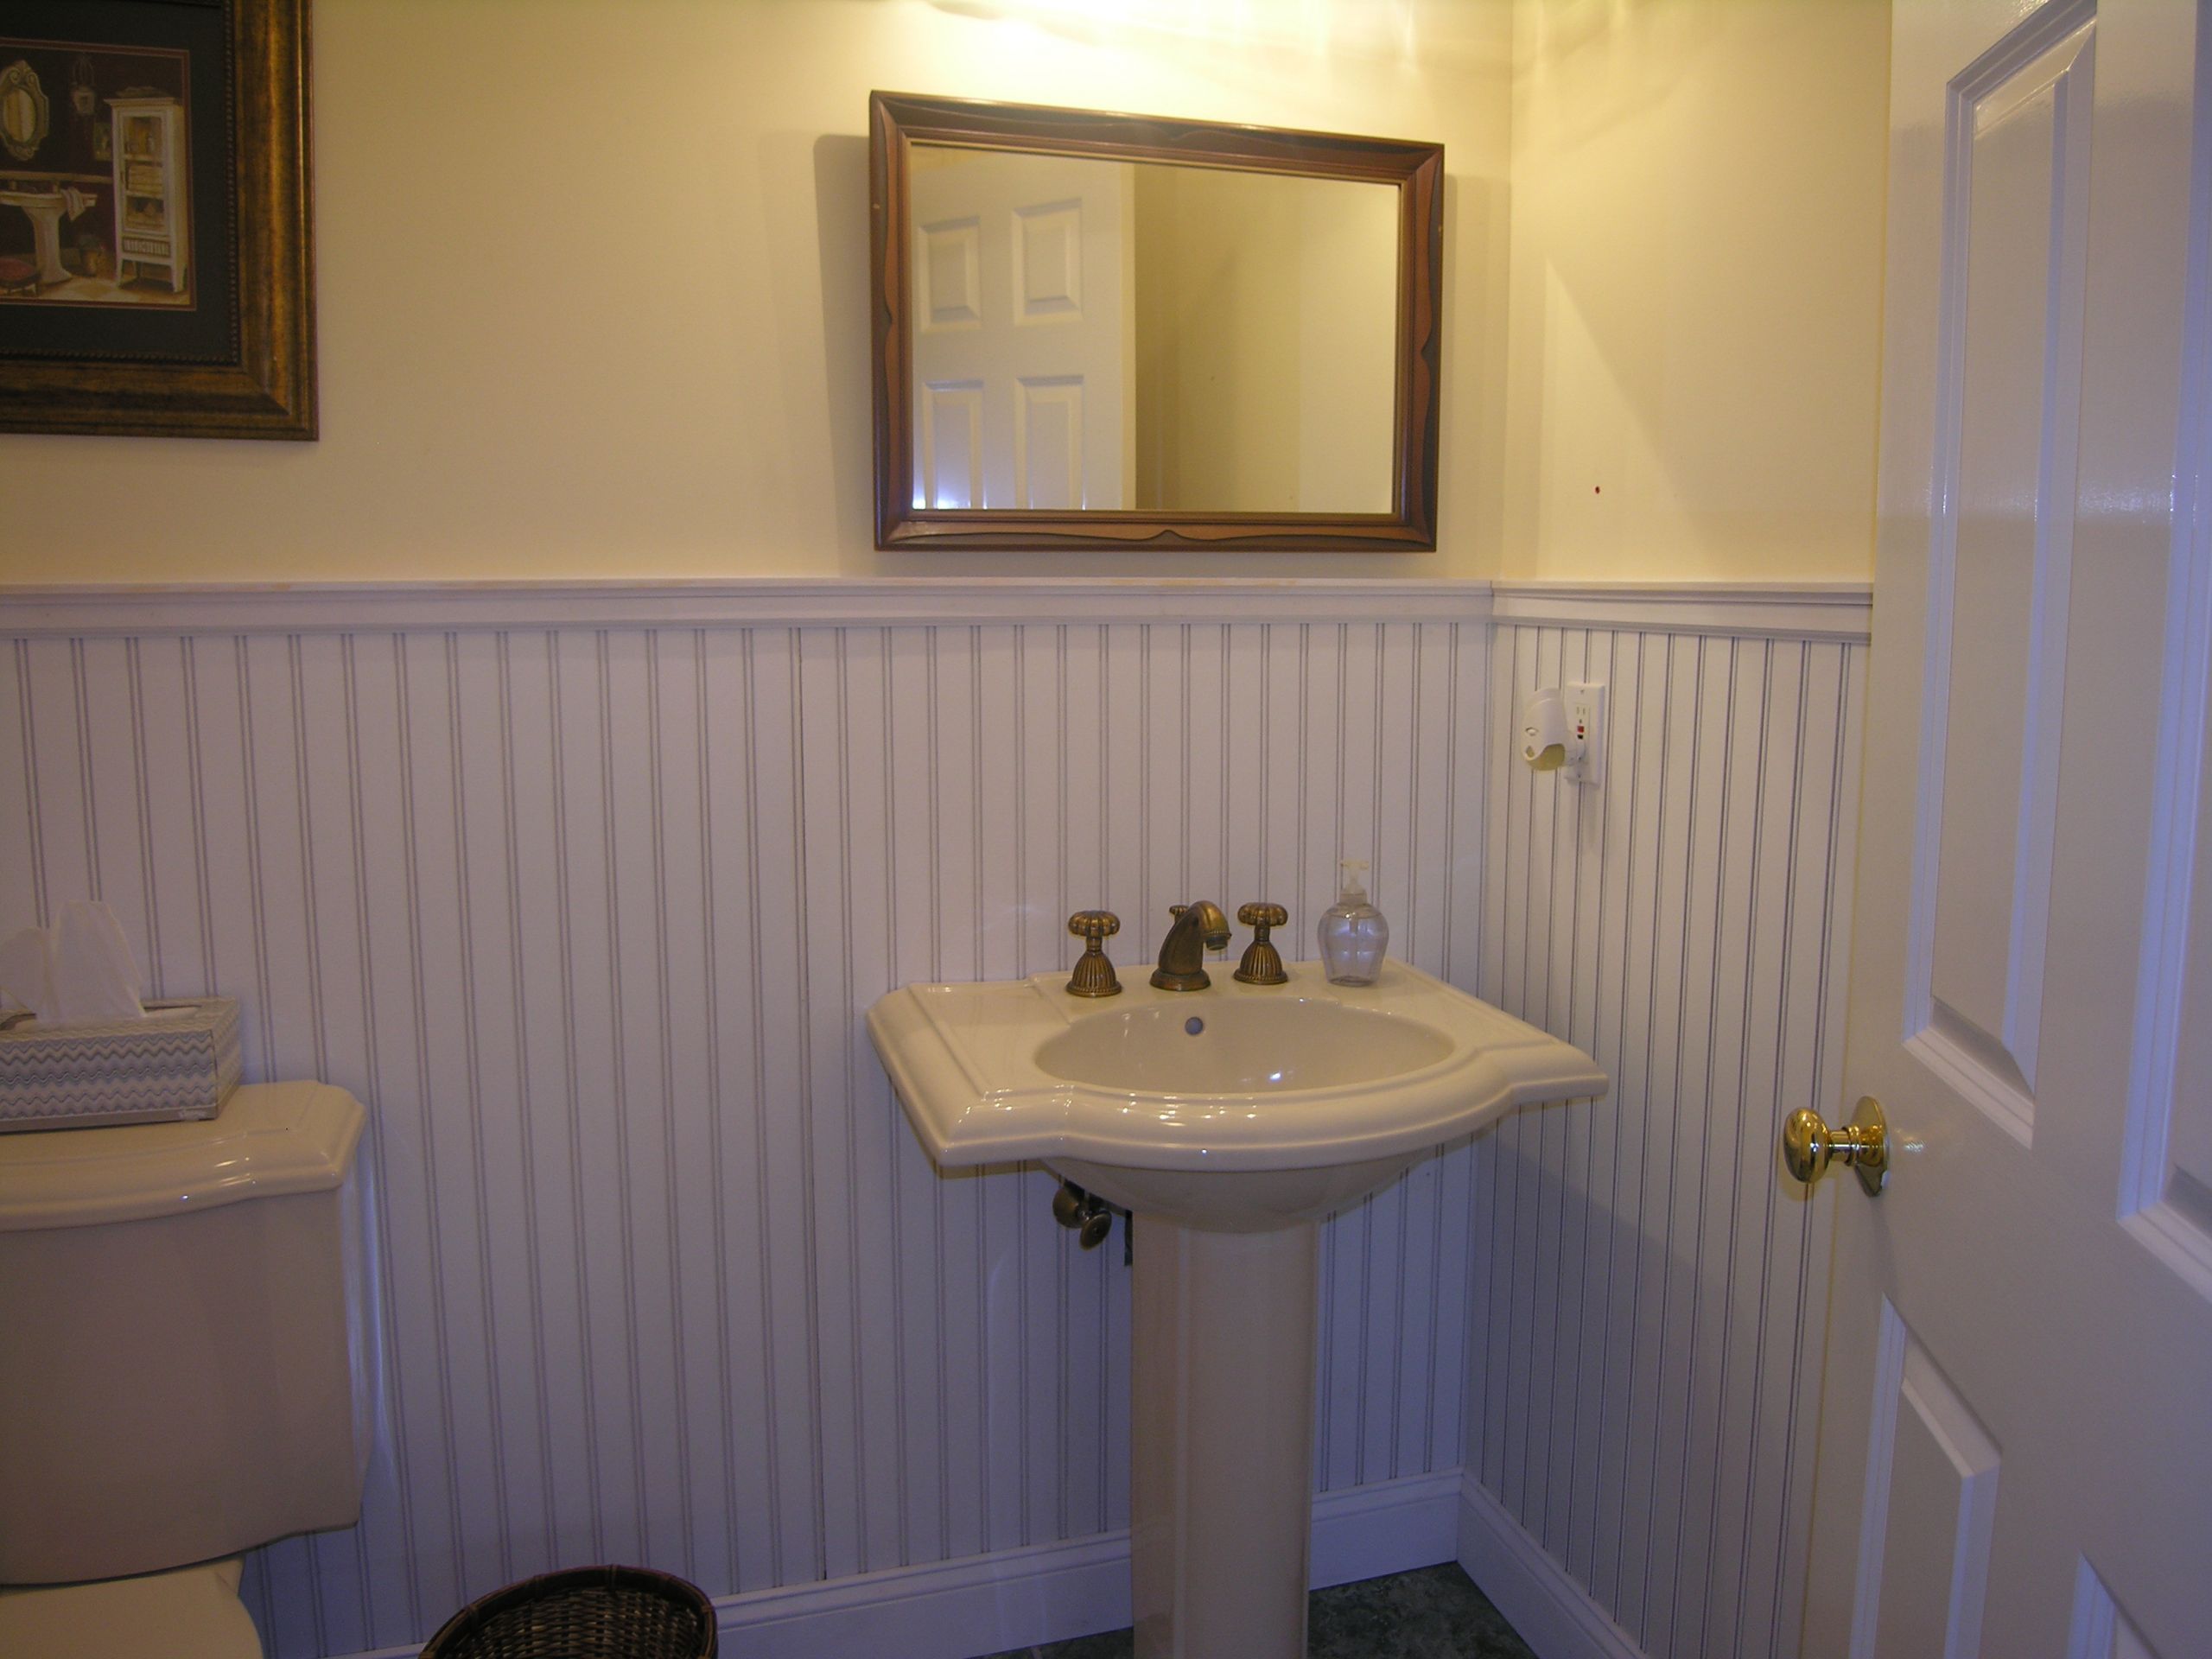 Cover Bathroom Tile
 Covering a tile wall with a beadboard wainscot